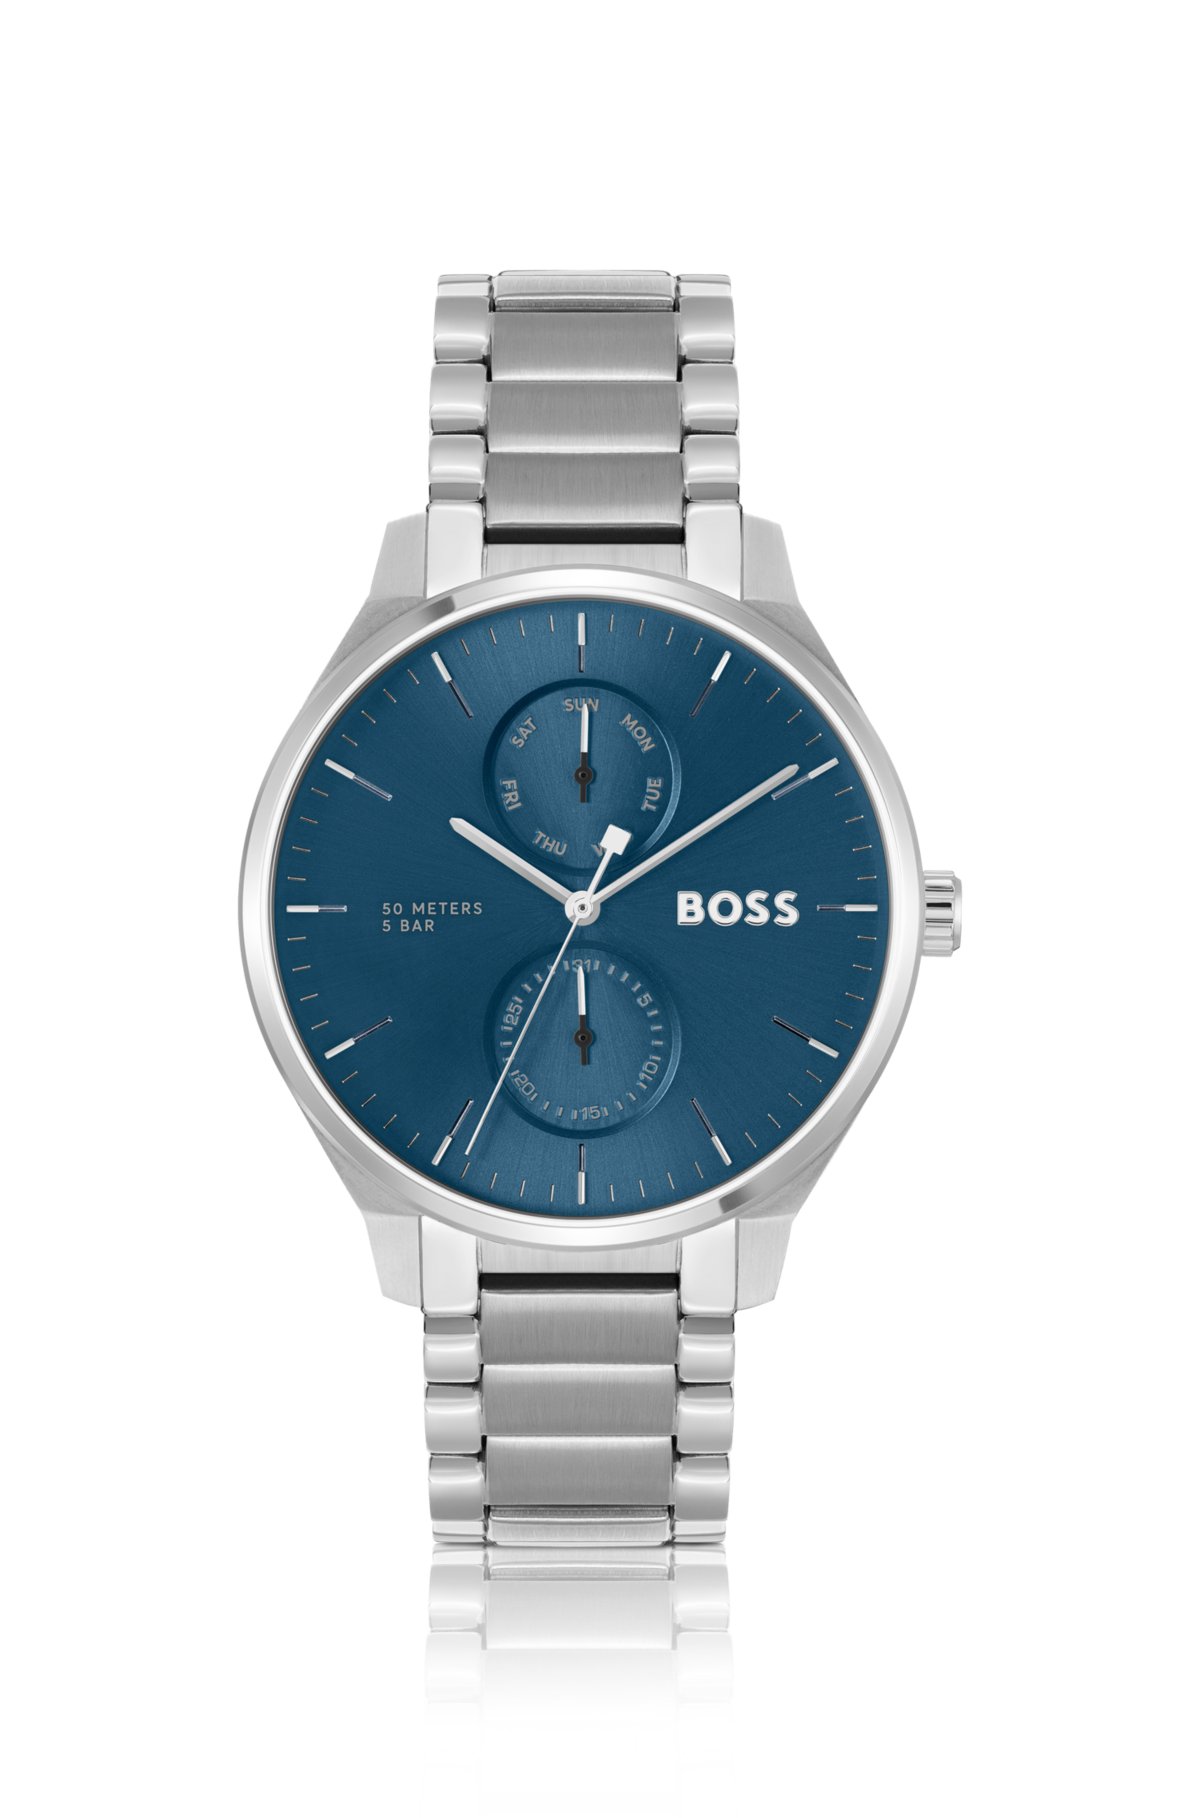 BOSS - Blue-dial watch with link bracelet stainless-steel